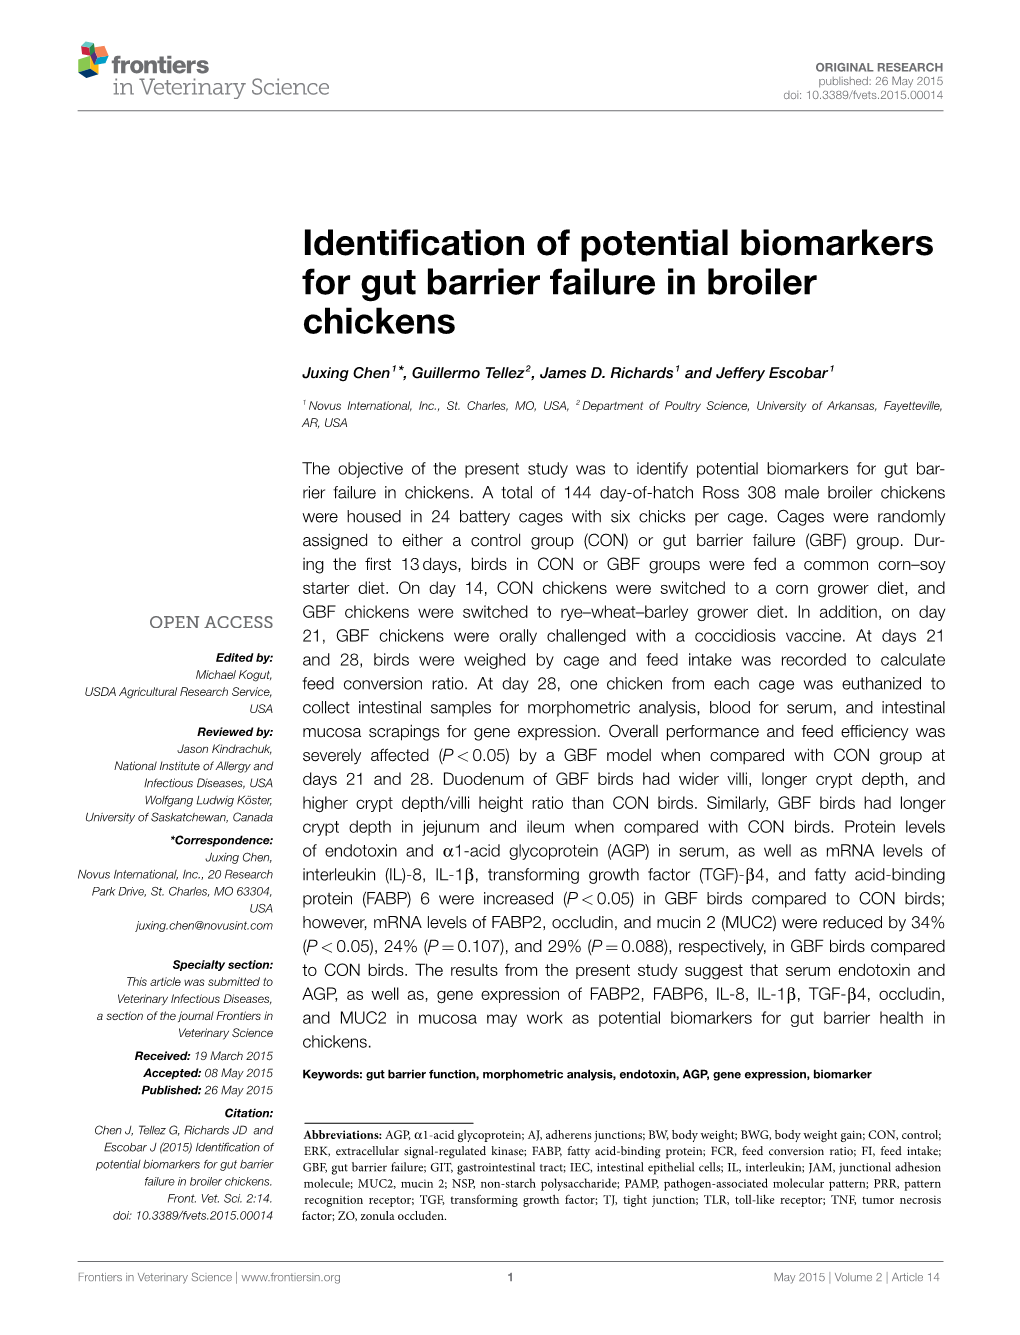 Identification of Potential Biomarkers for Gut Barrier Failure in Broiler Chickens